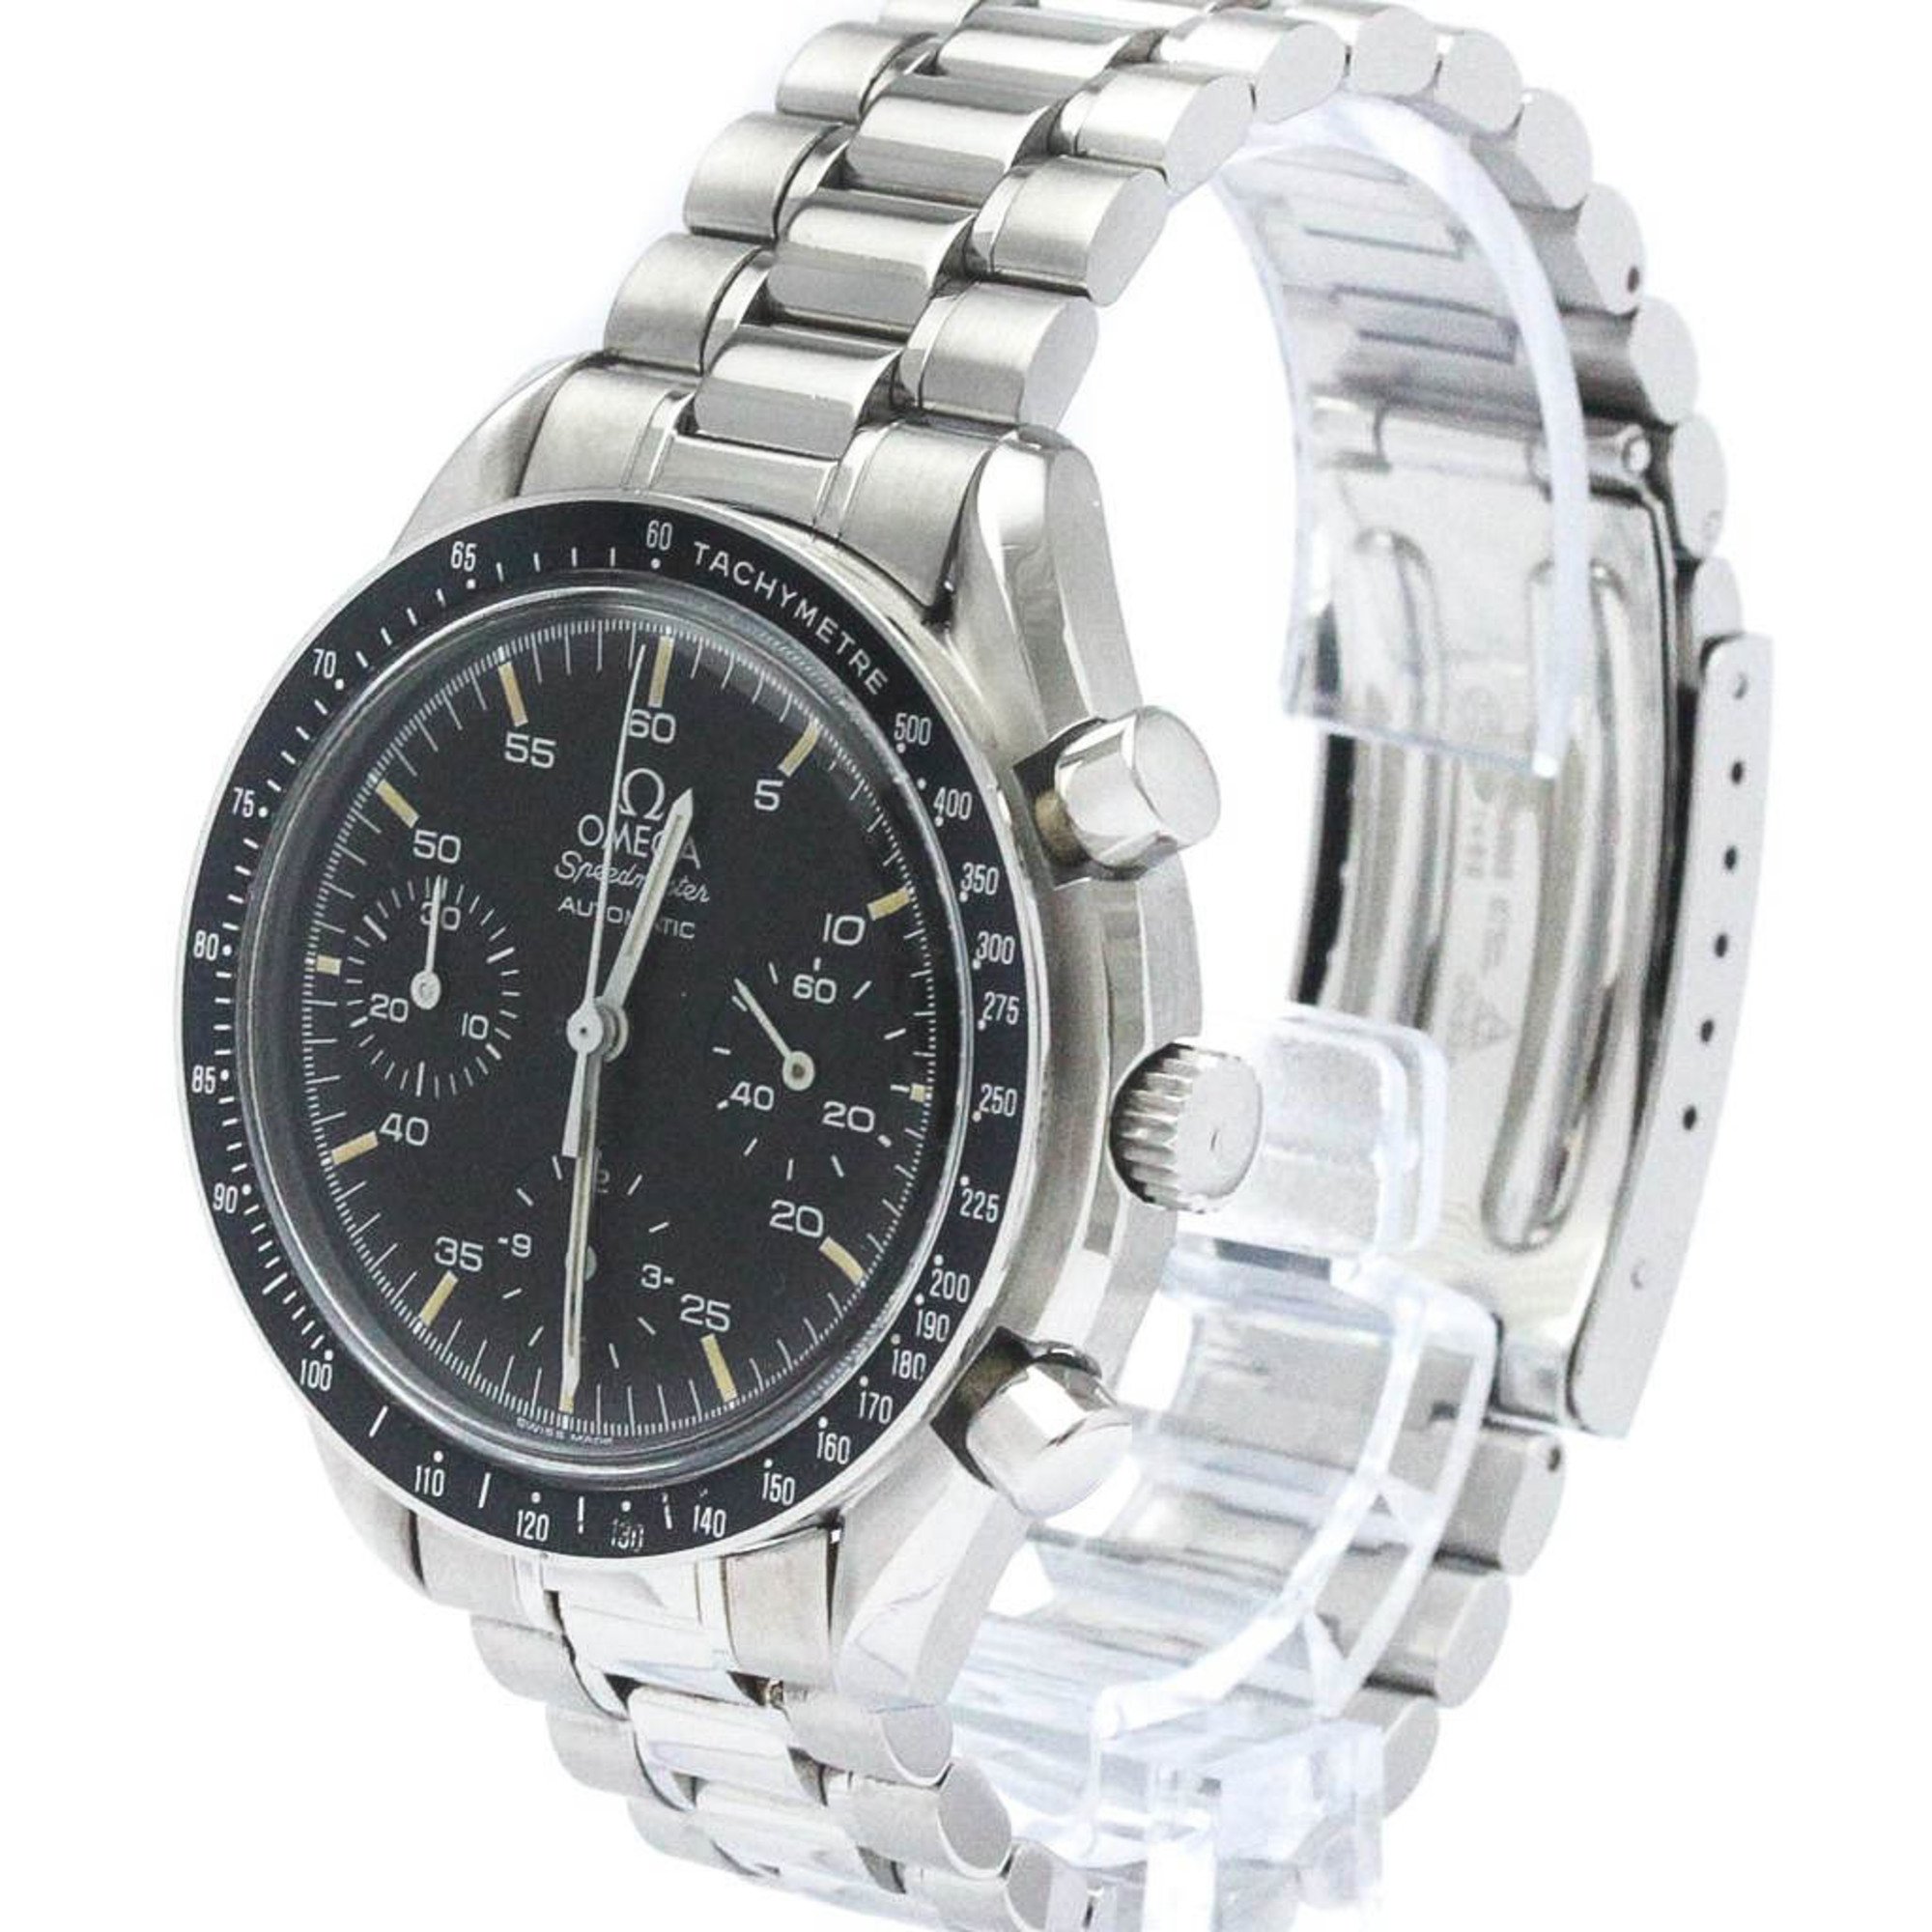 Polished OMEGA Speedmaster Automatic Steel Mens Watch 3510.50 BF567342